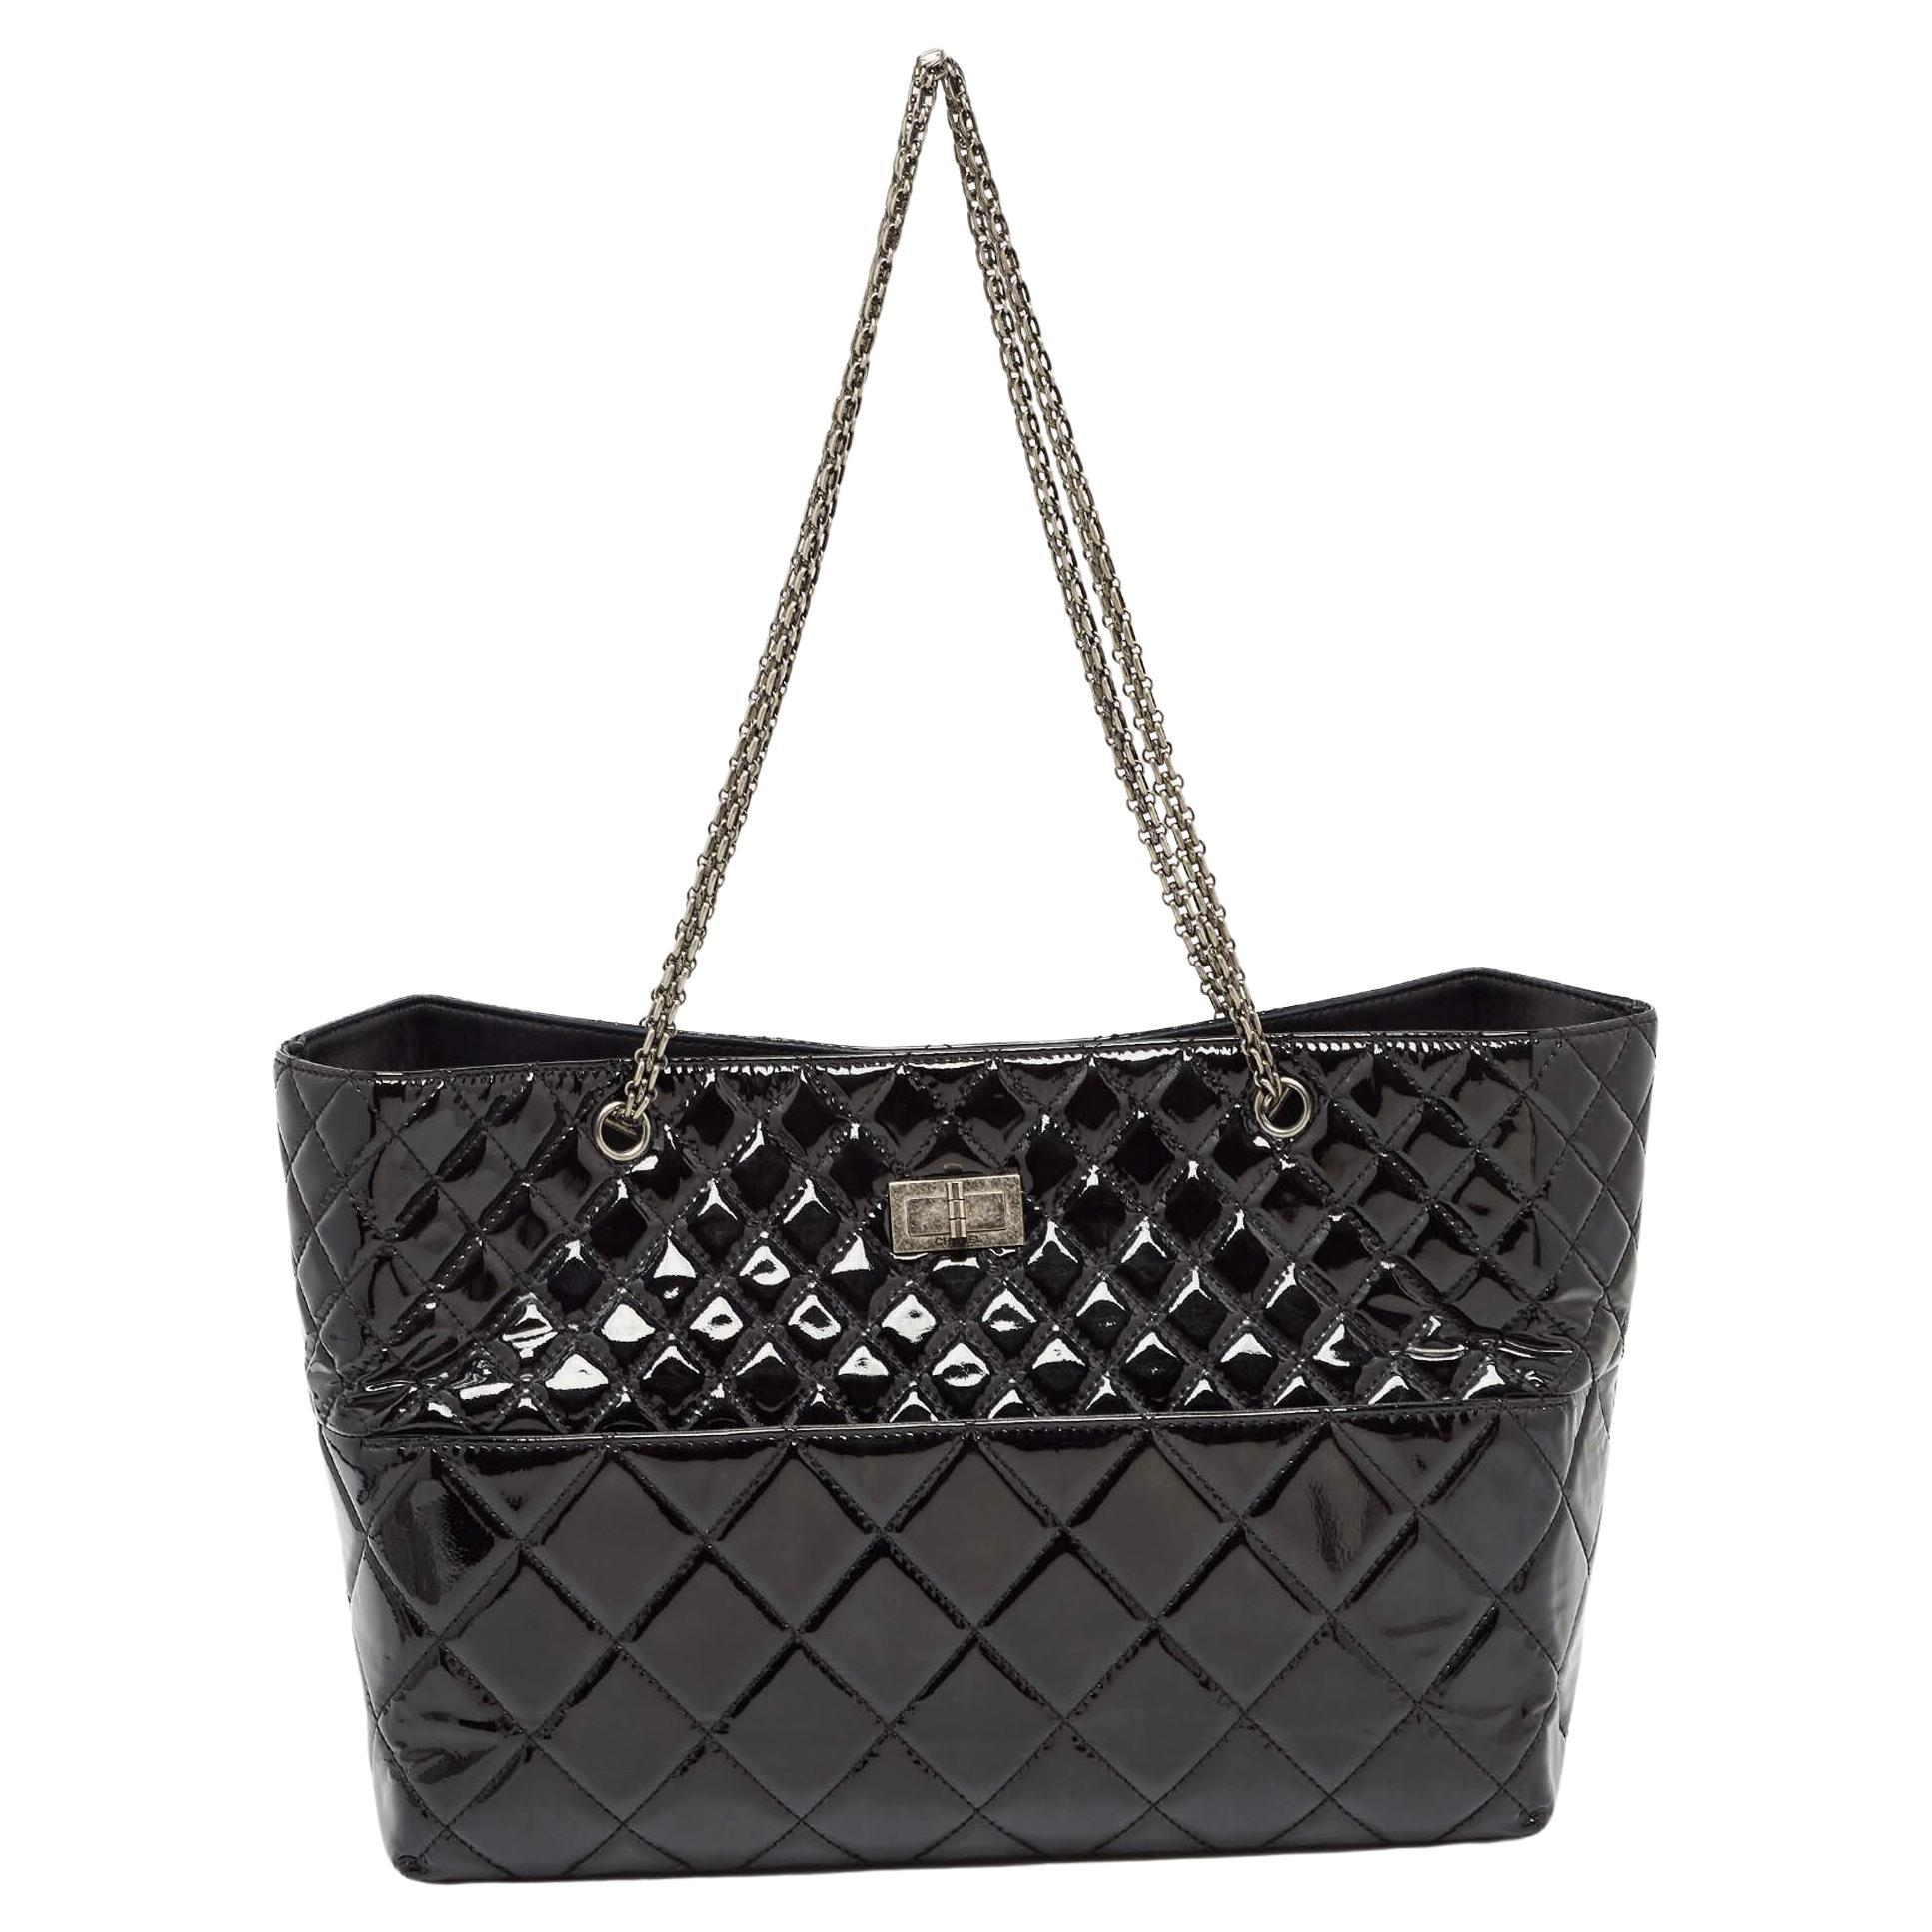 Chanel Black Quilted Patent Leather Reissue East West Tote For Sale